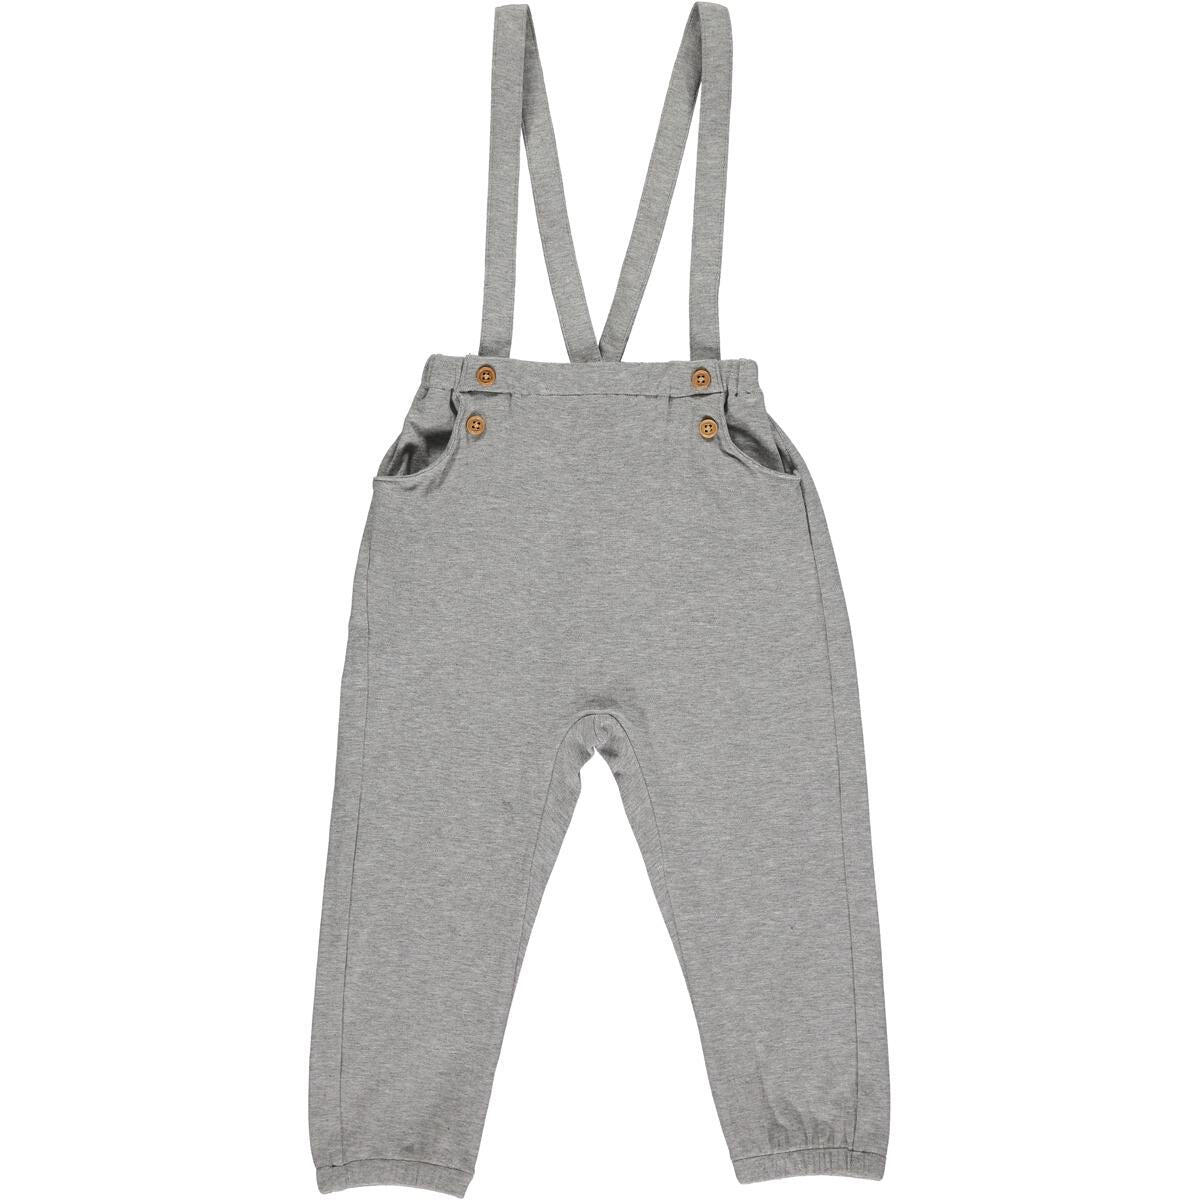 TINY VICTORIES OVERALL PANTS TV191A